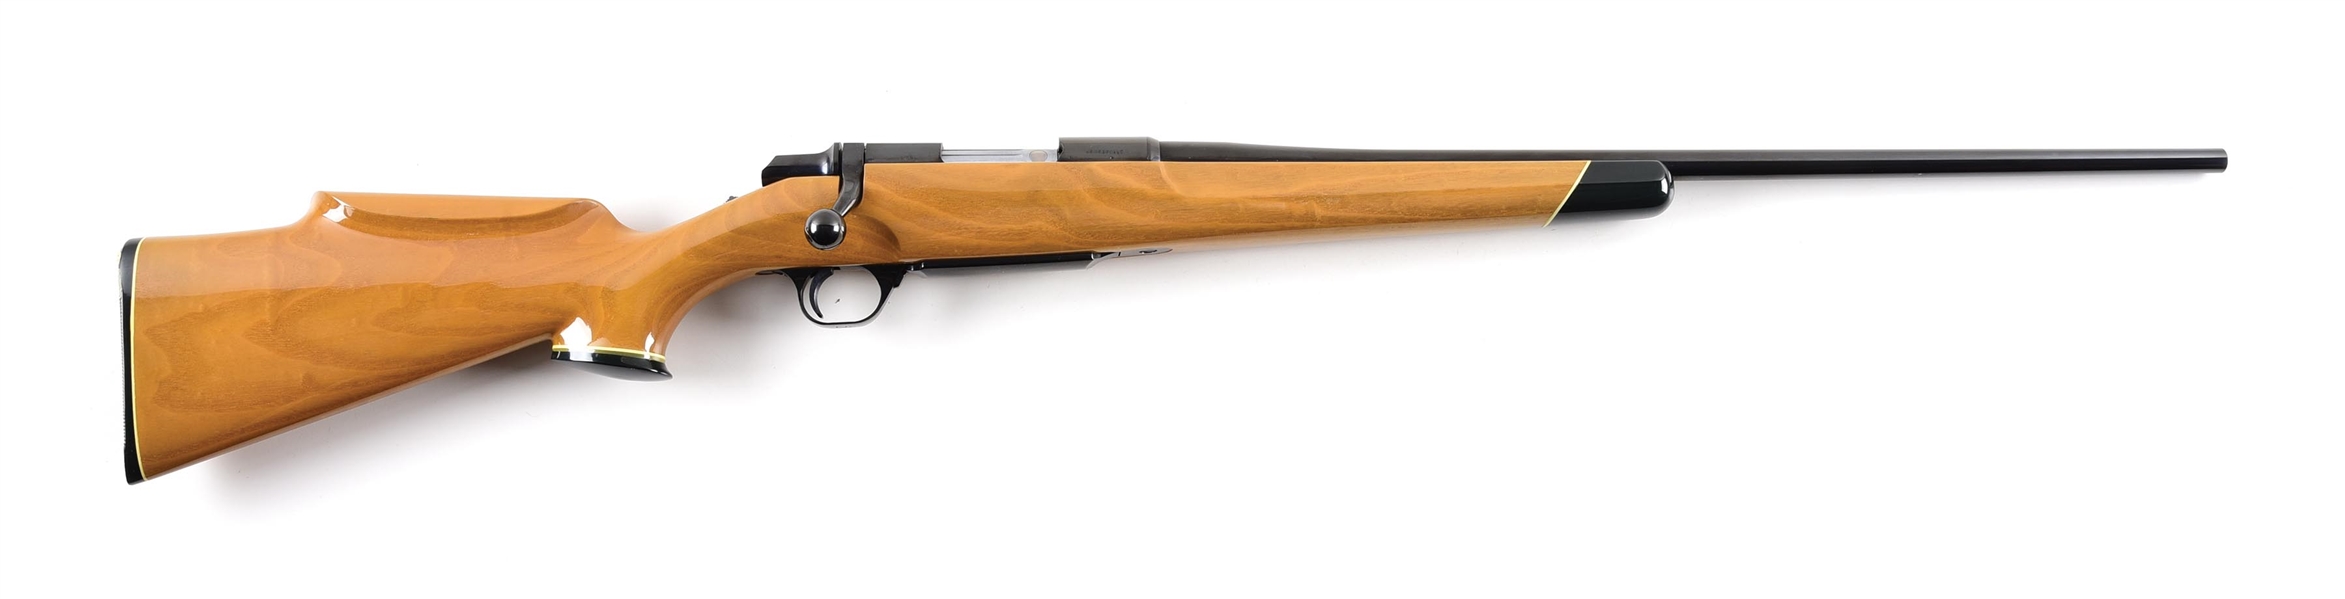 (M) BROWNING BBR BOLT ACTION RIFLE WITH SASSAFRAS STOCK.